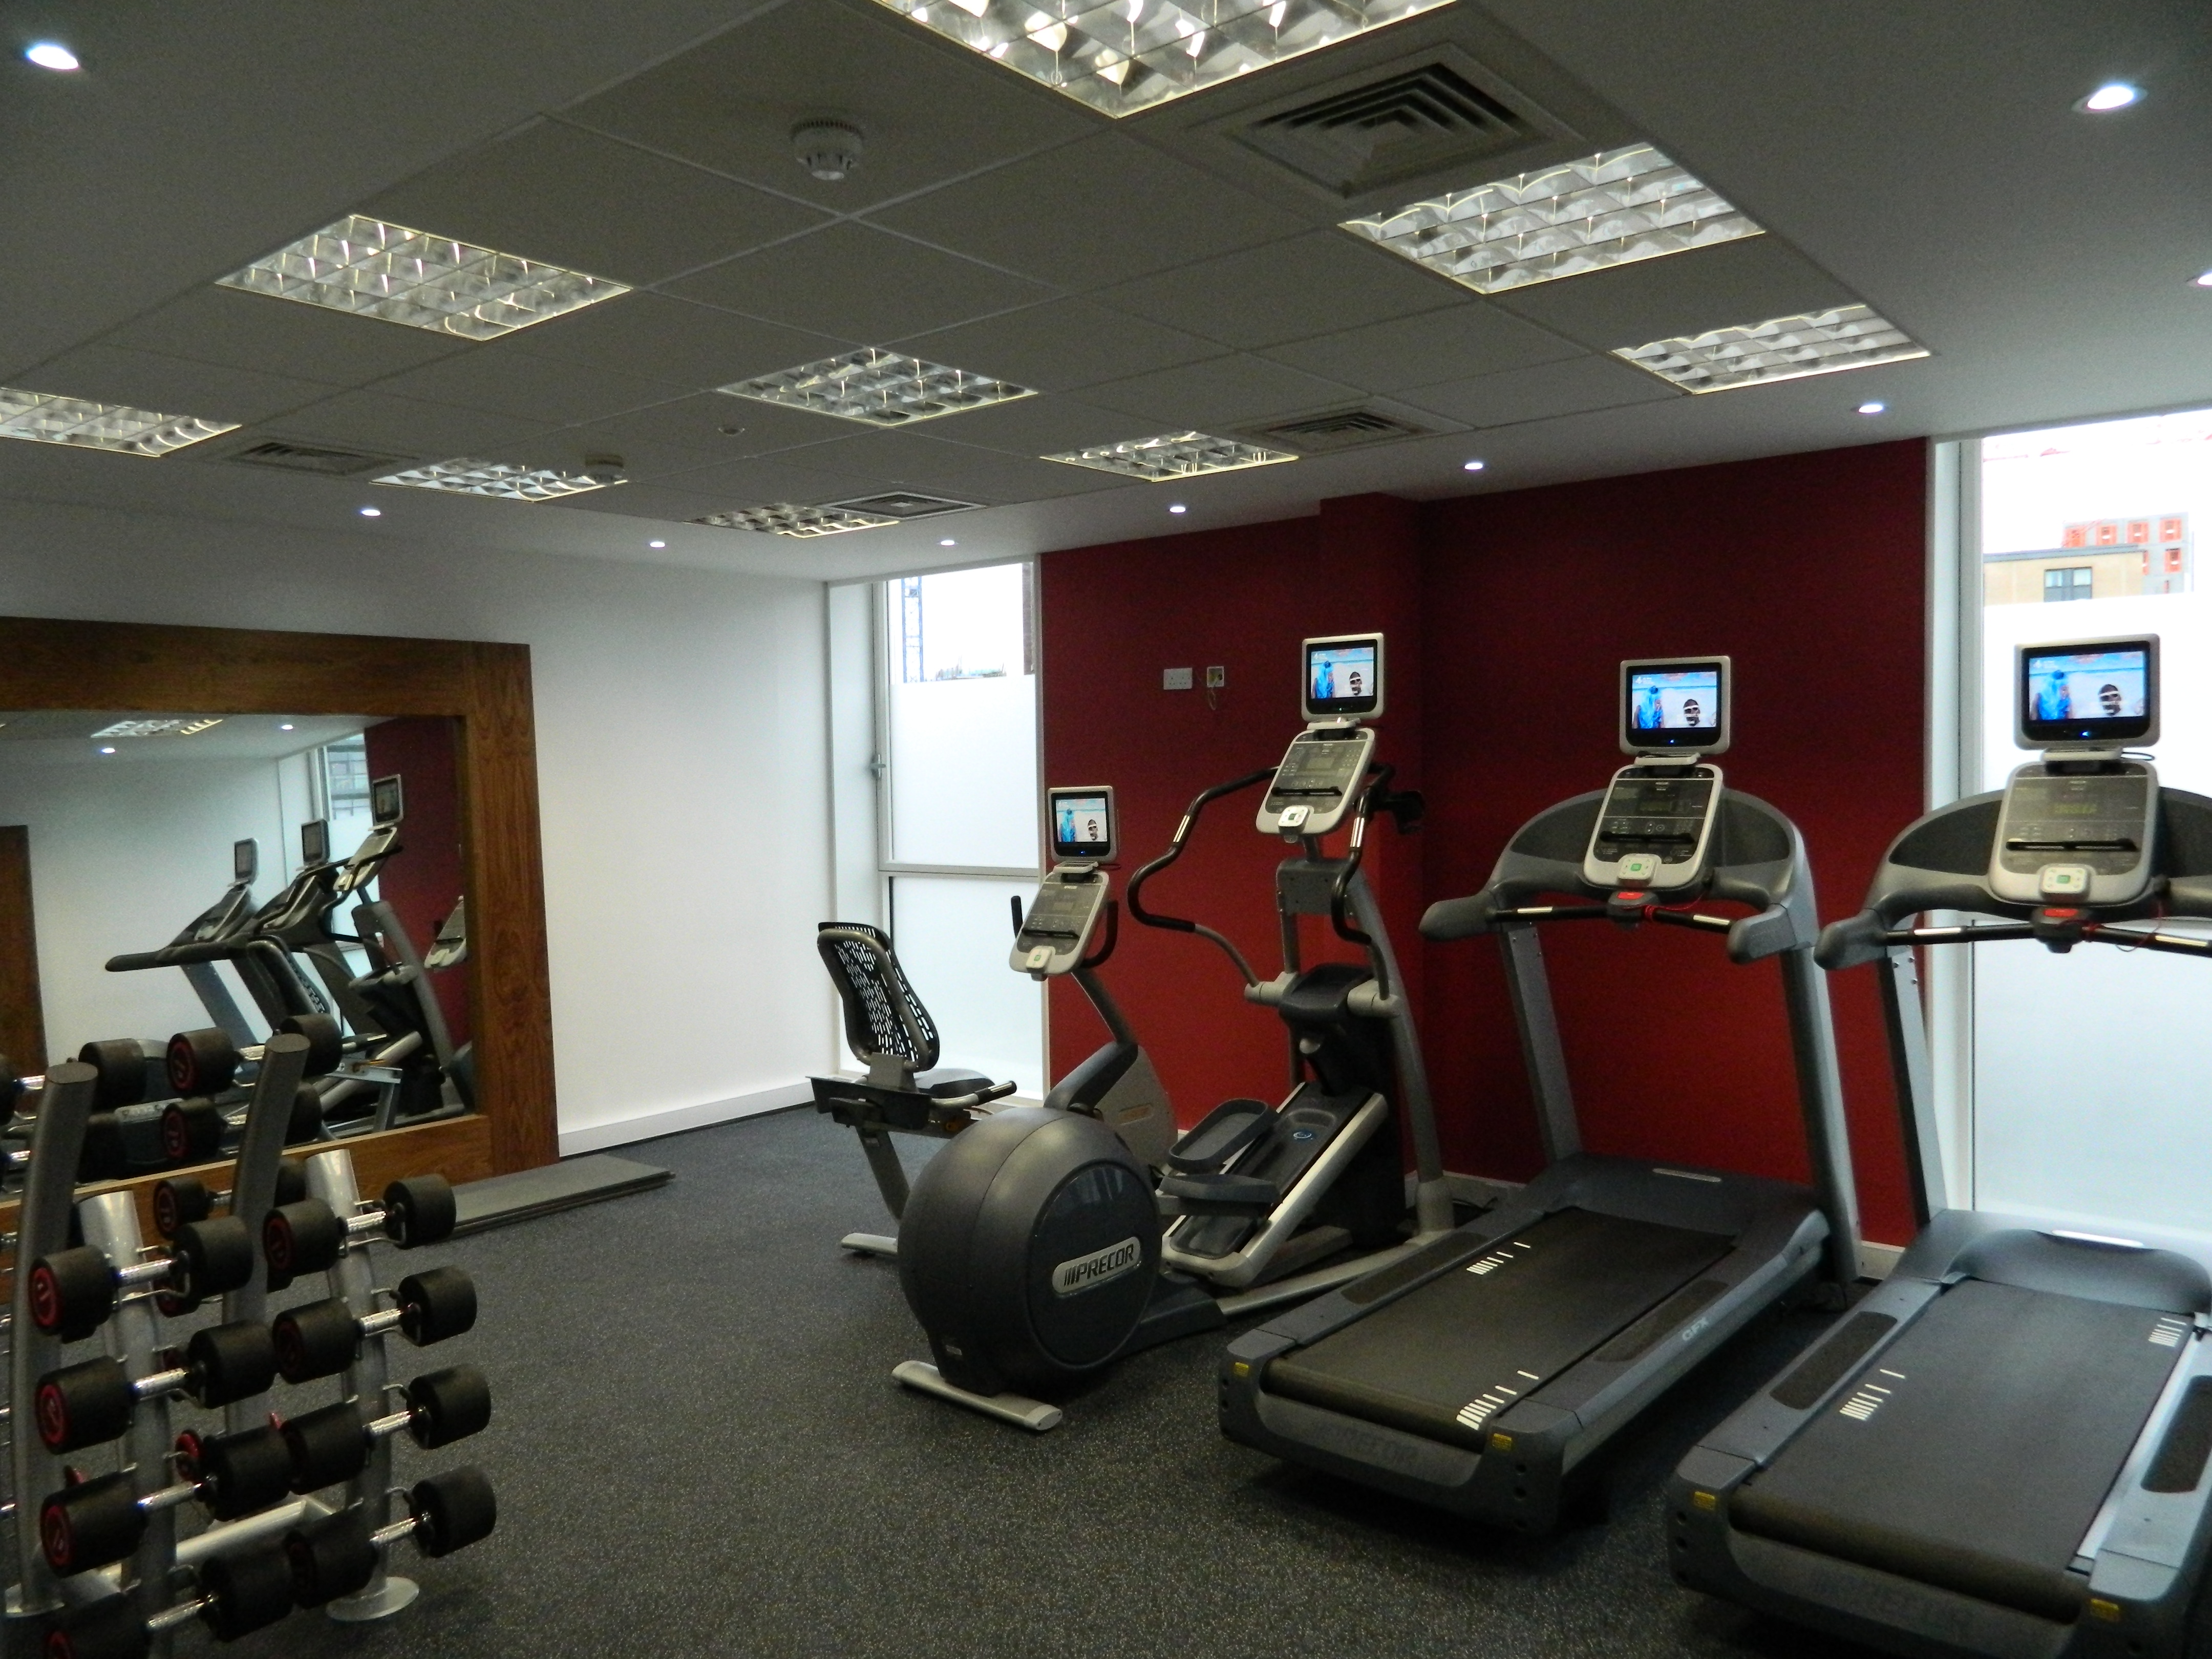 Fitness Center Equipment Including Cardio Machines, Free Weights, Exercise Ball and a TV